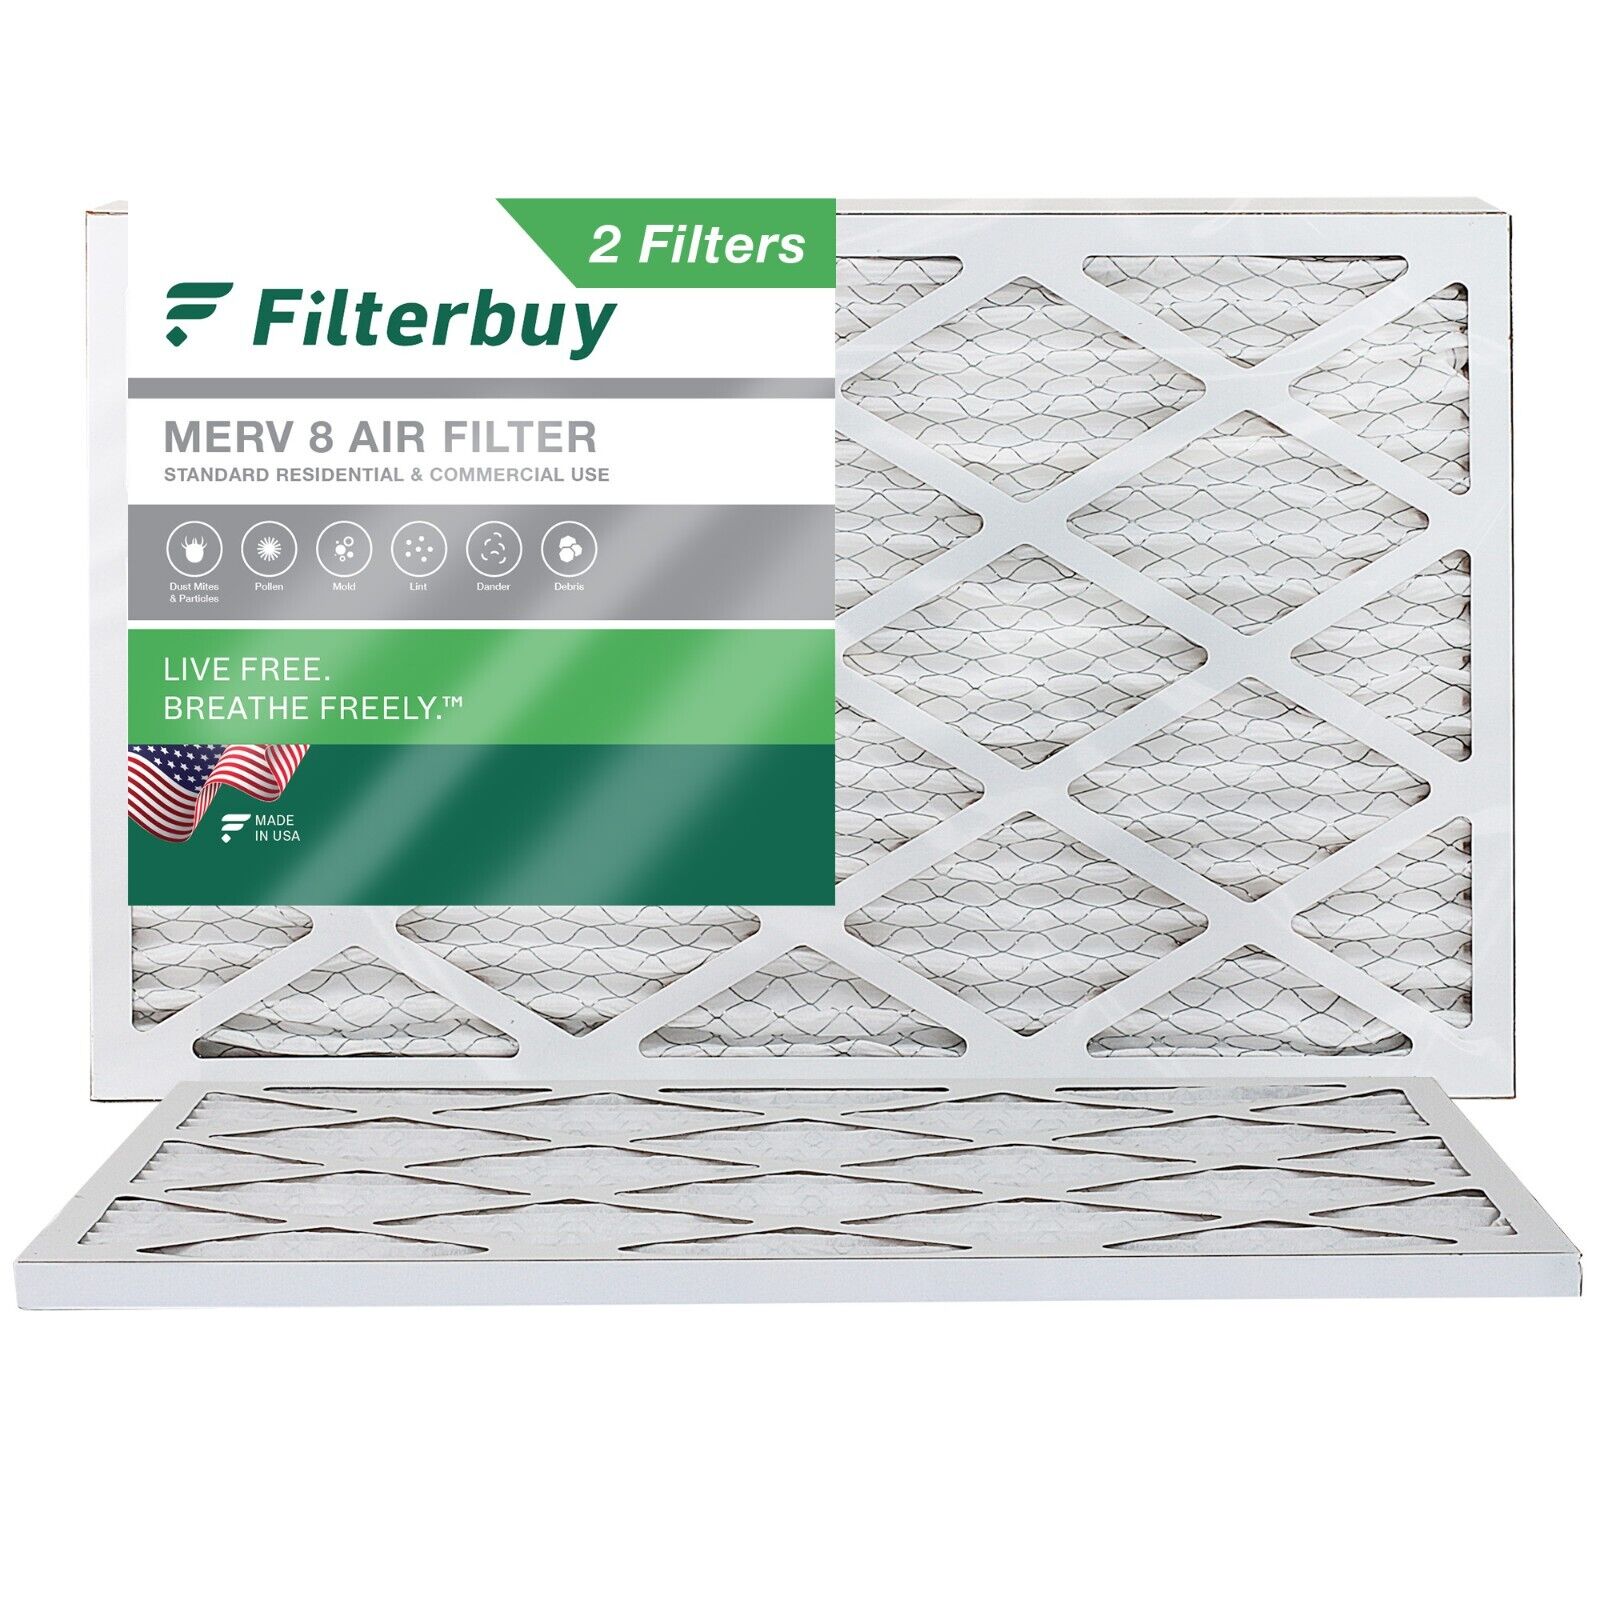 Filterbuy 12x24x1 Pleated Air Filters, Replacement for HVAC AC Furnace (MERV 8)